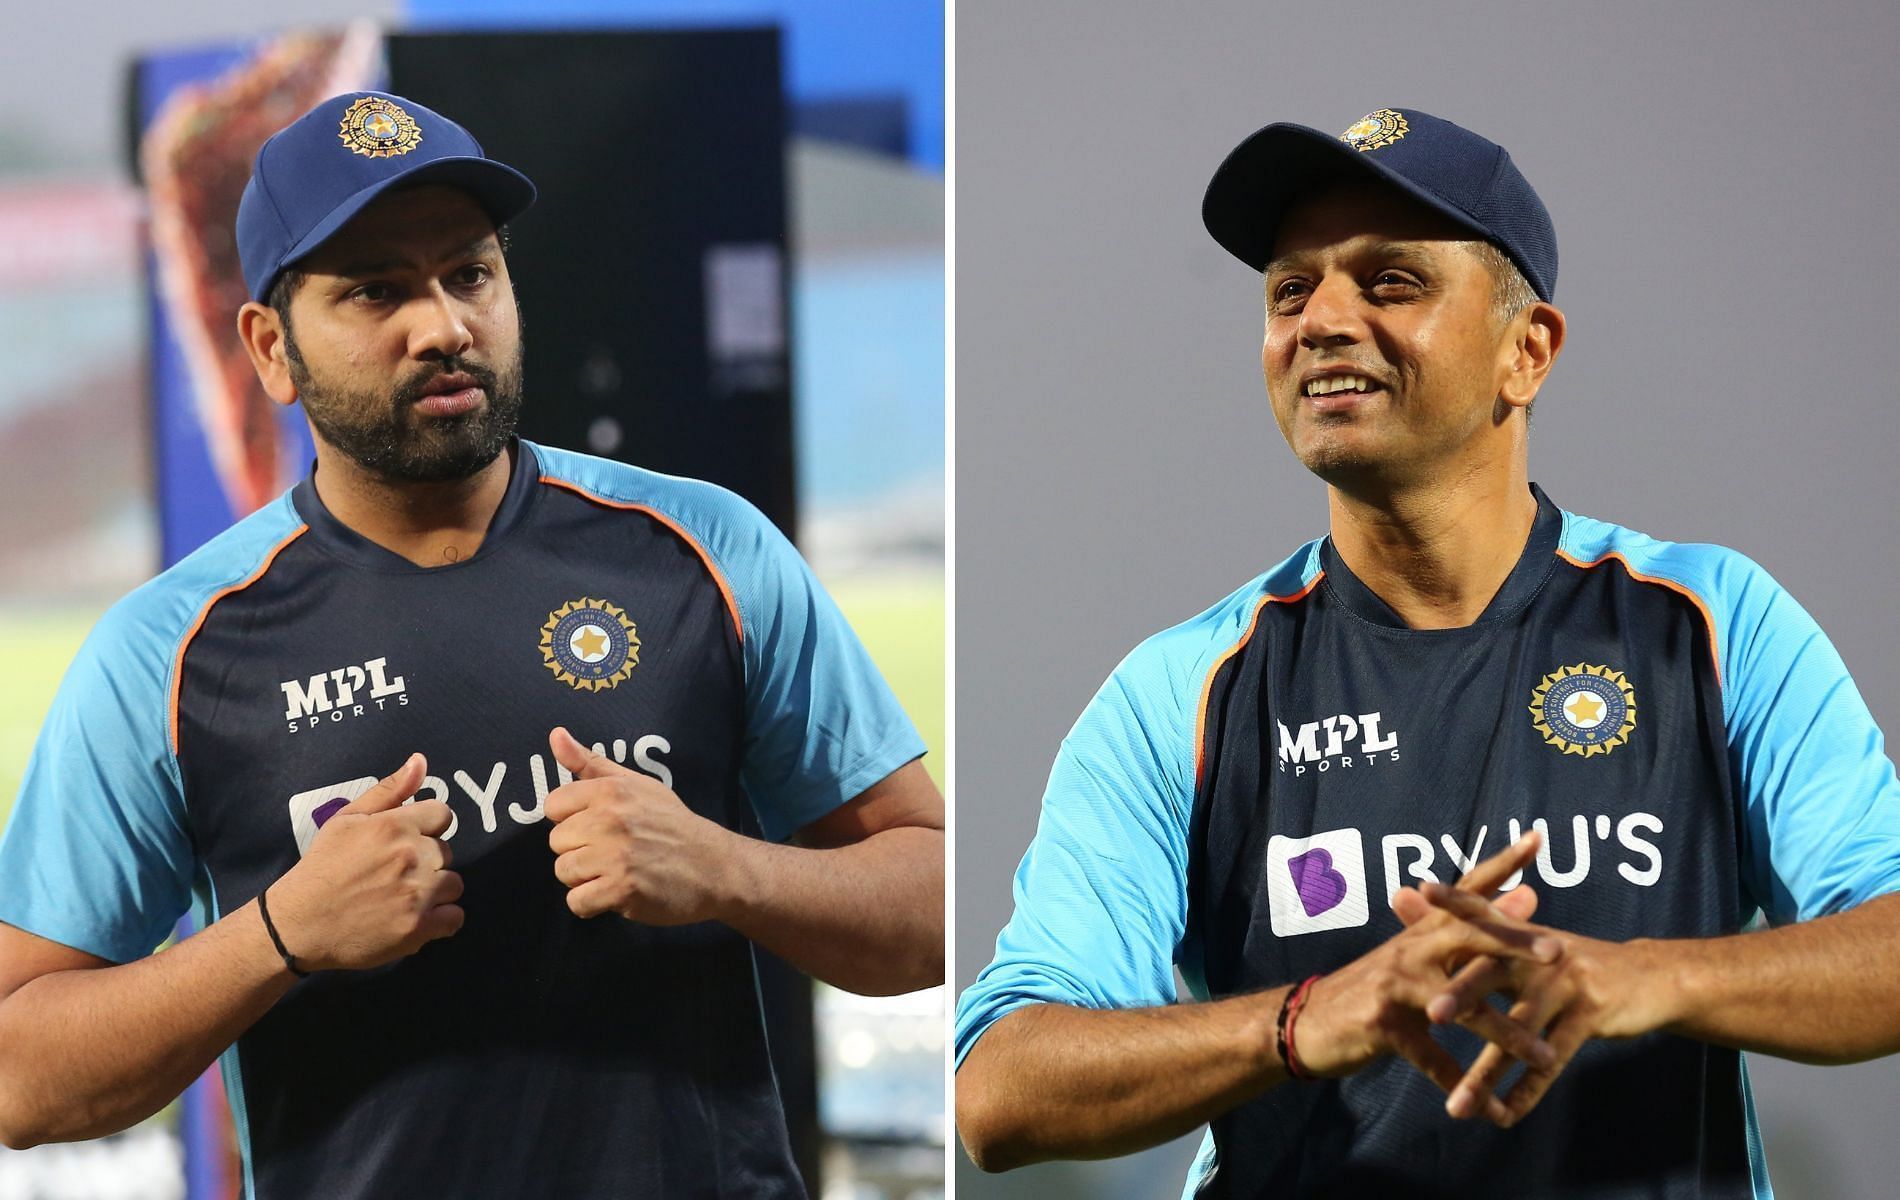 The Indian cricket team looks more flexible under Rahul Dravid and Rohit Sharma (Image: Twitter/BCCI)